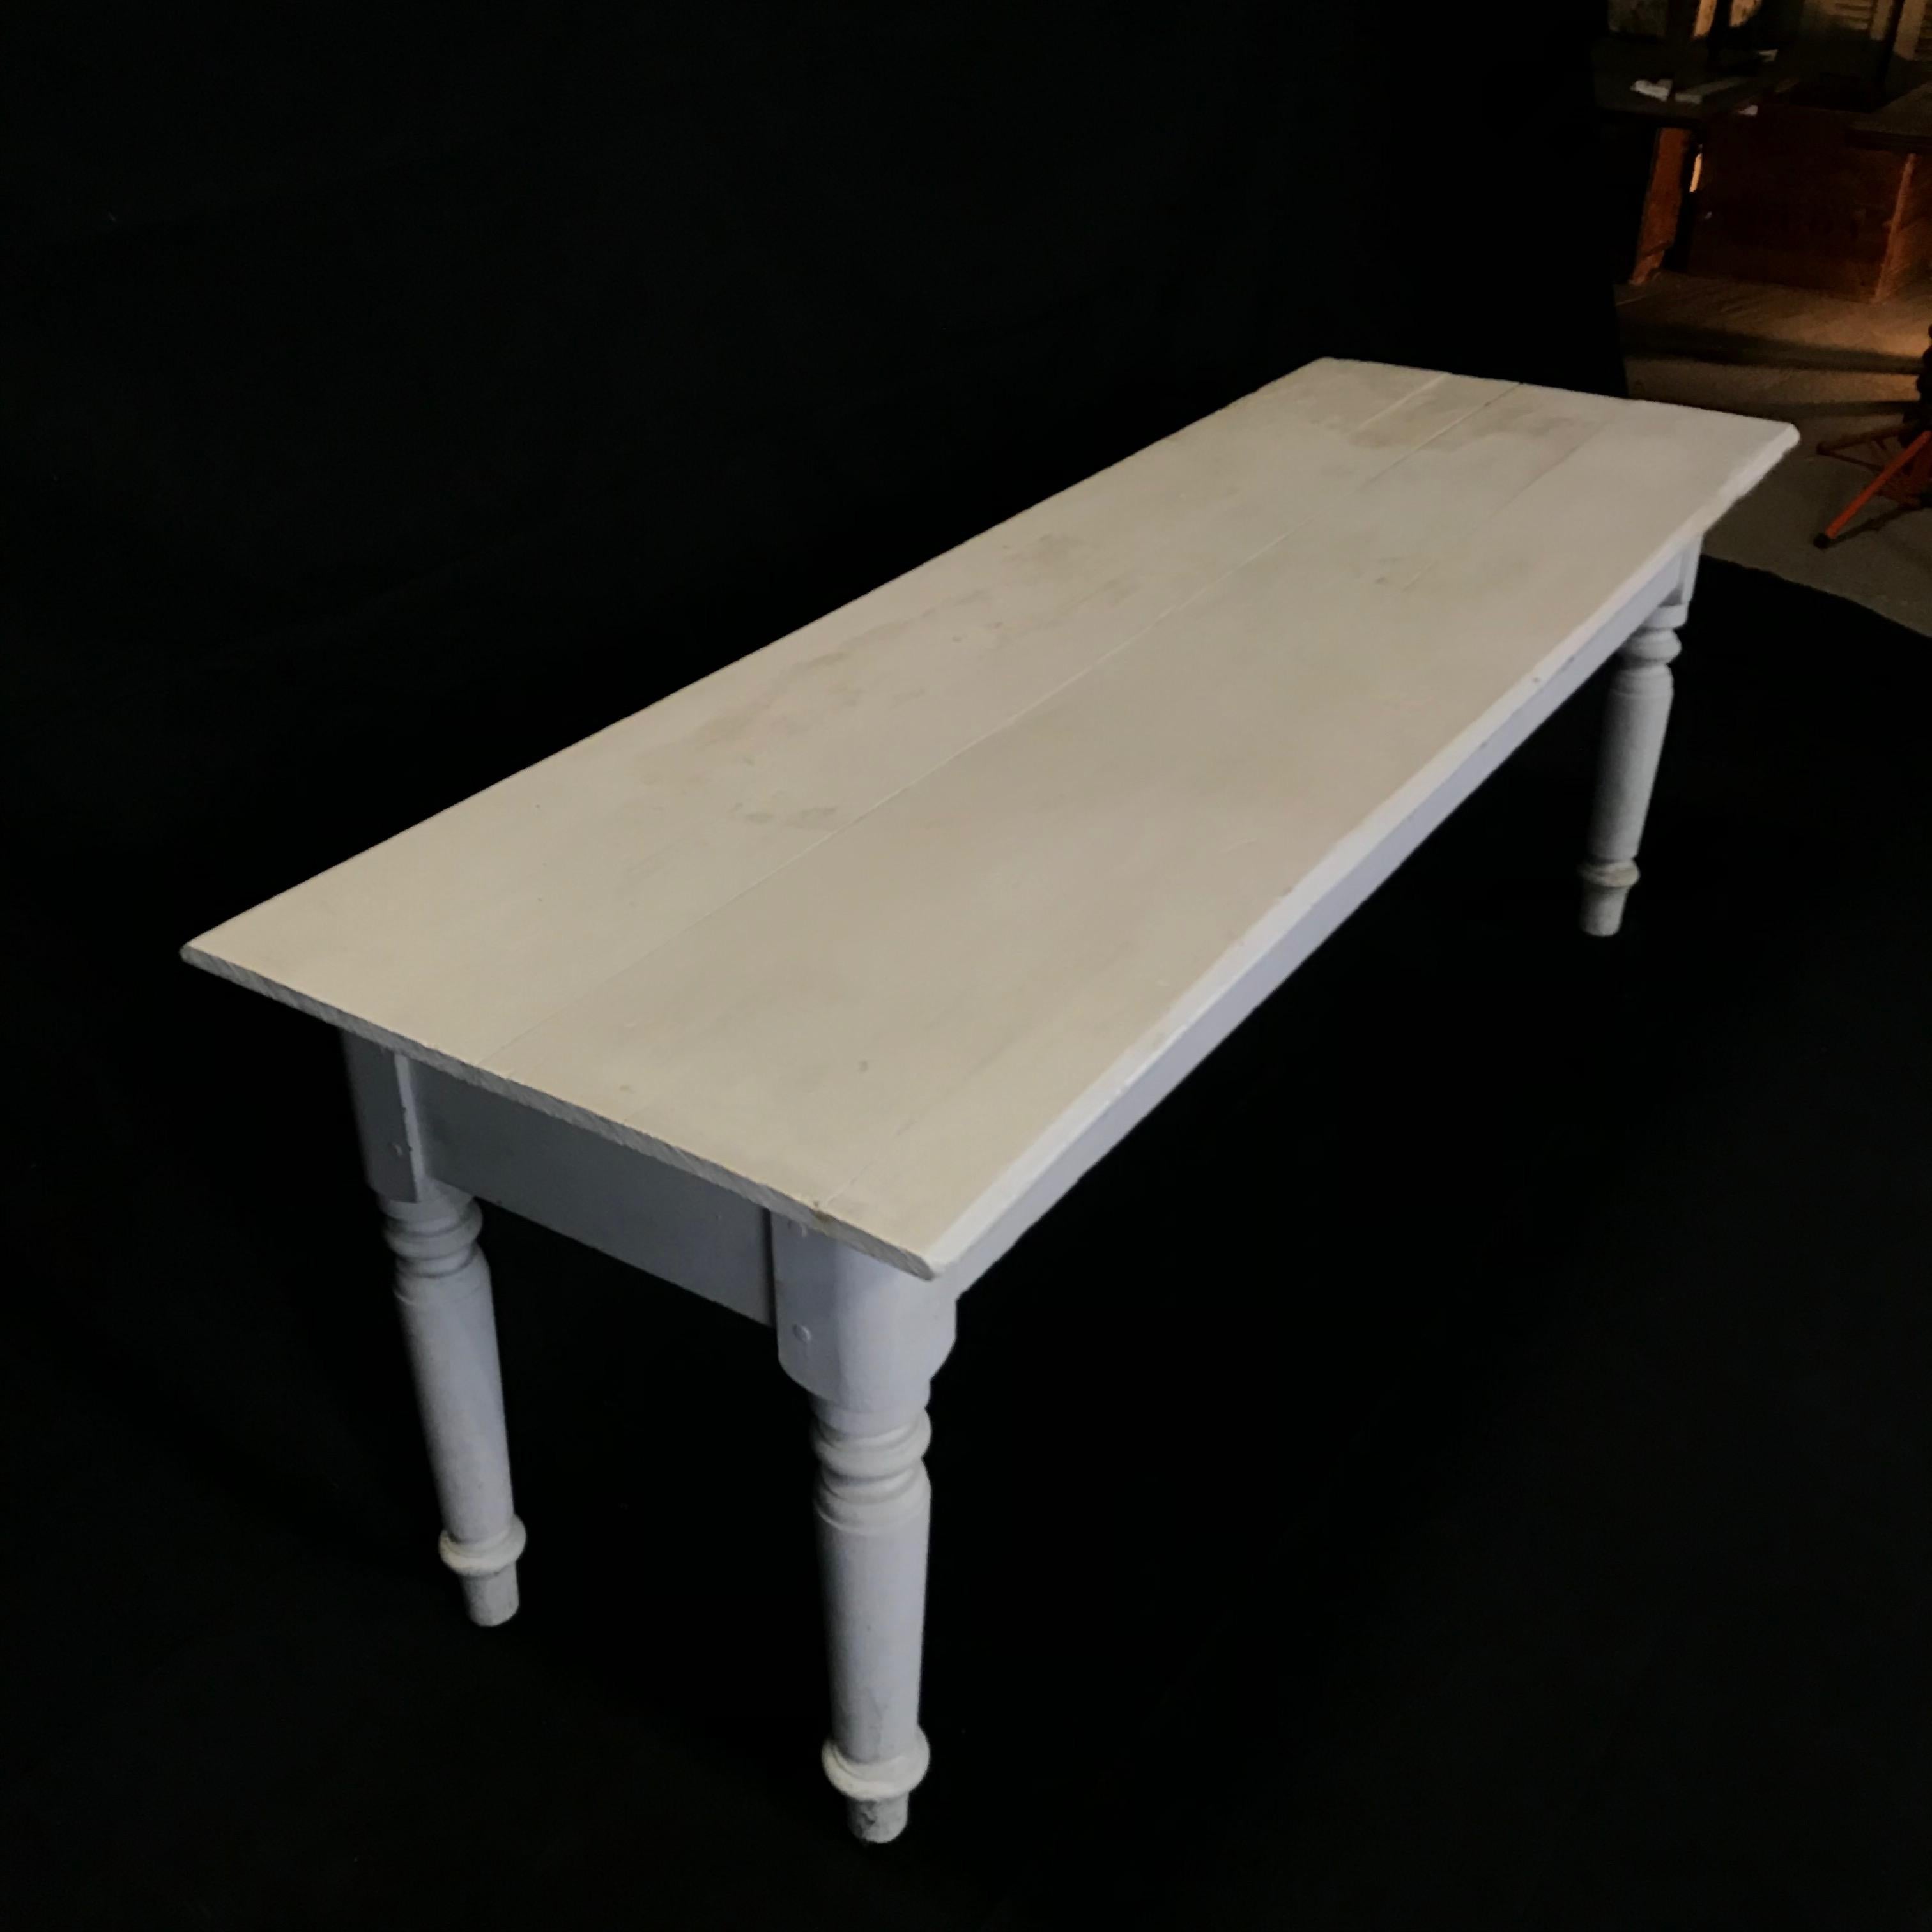 Early country farmhouse table with original mortise and tenon construction reinforced with handcut wooden dowels and vintage ivory paint. Great size and versatility.
#4287

Measures: H skirt 22.25”.